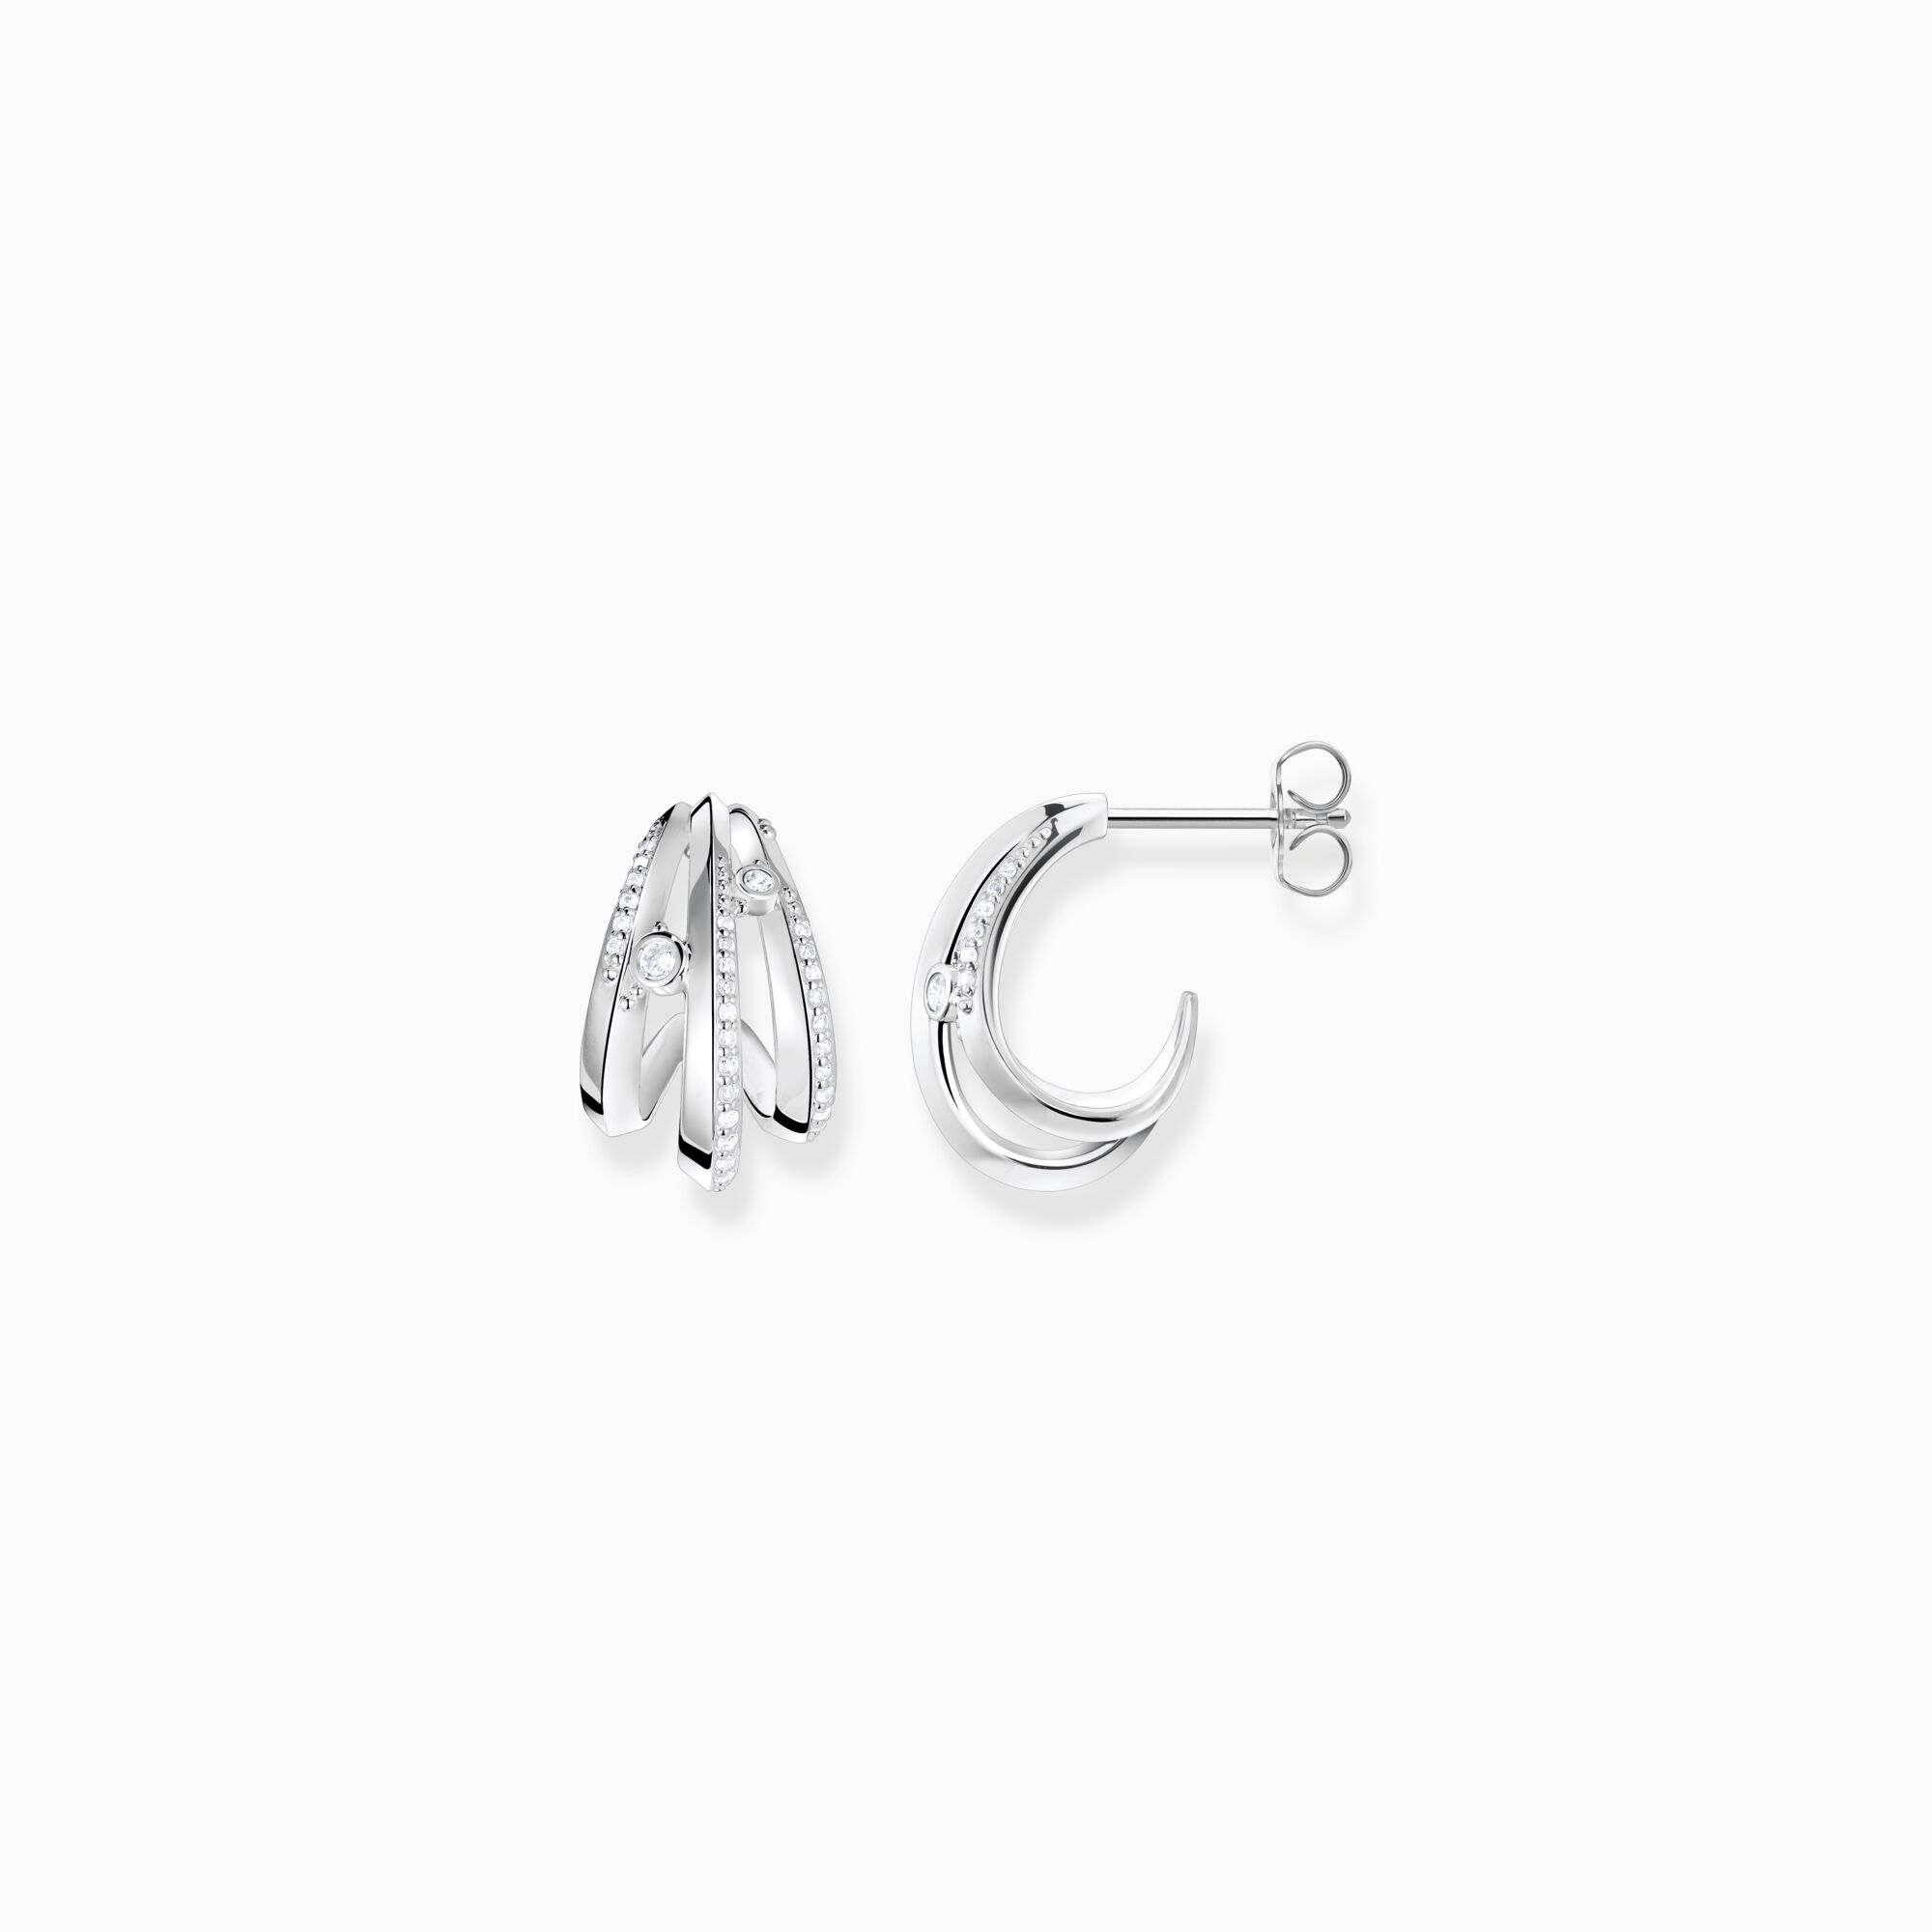 Hoop earrings wave with white stones from the  collection in the THOMAS SABO online store